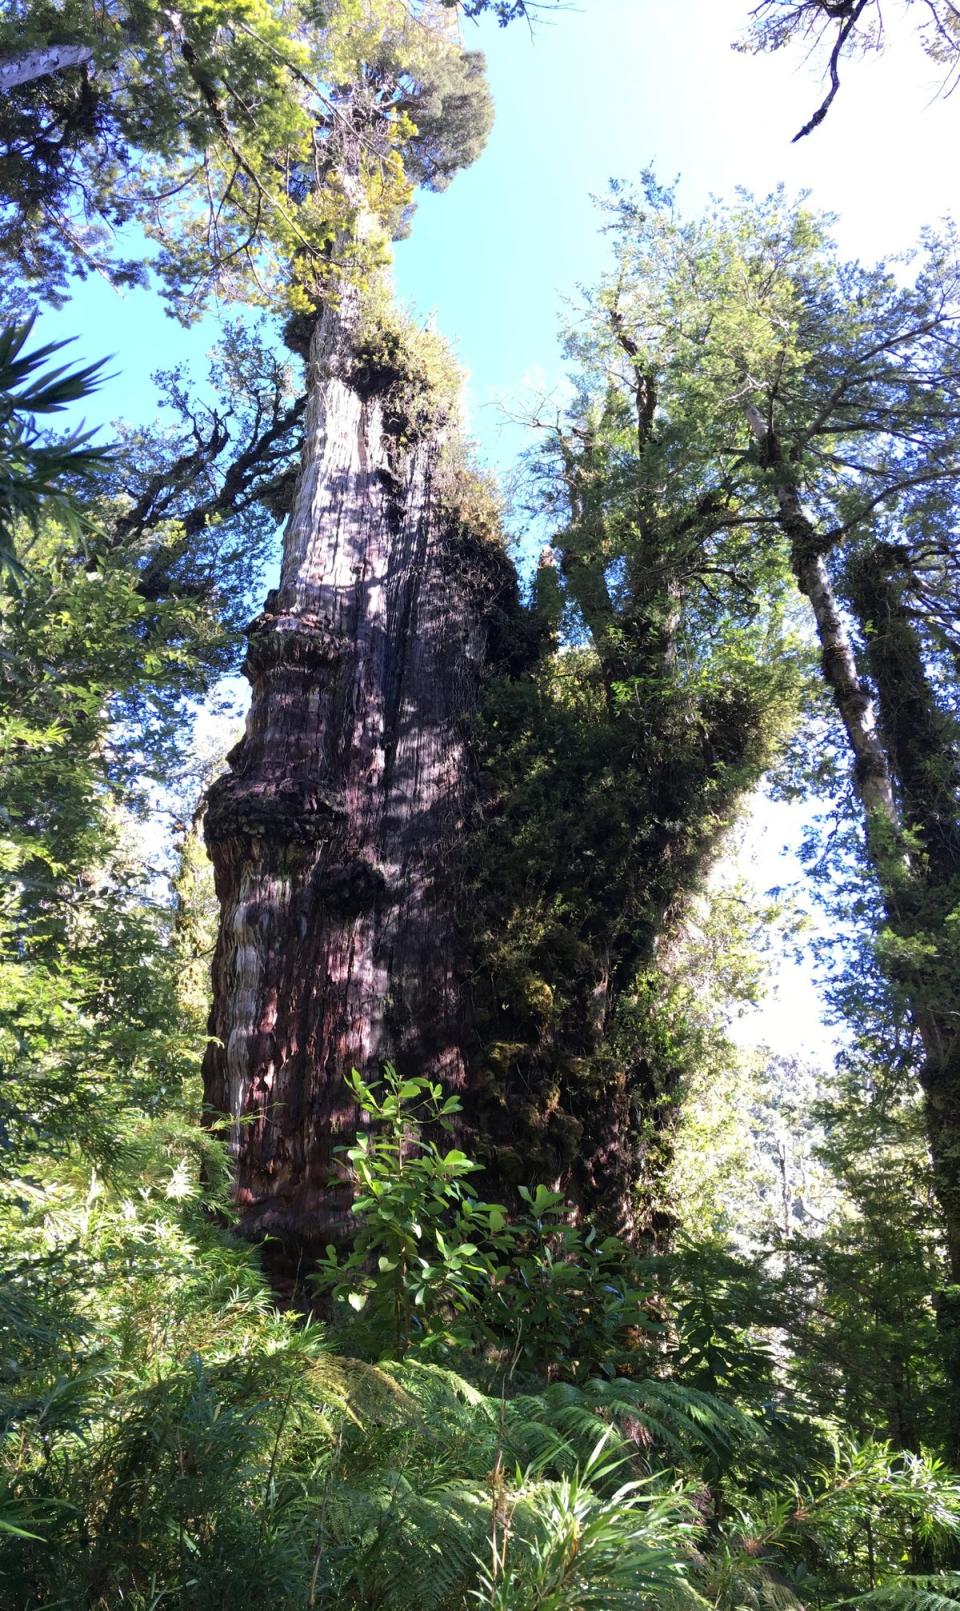 Scientists could not determine the exact age of the tree based on the massive trunk (via REUTERS)